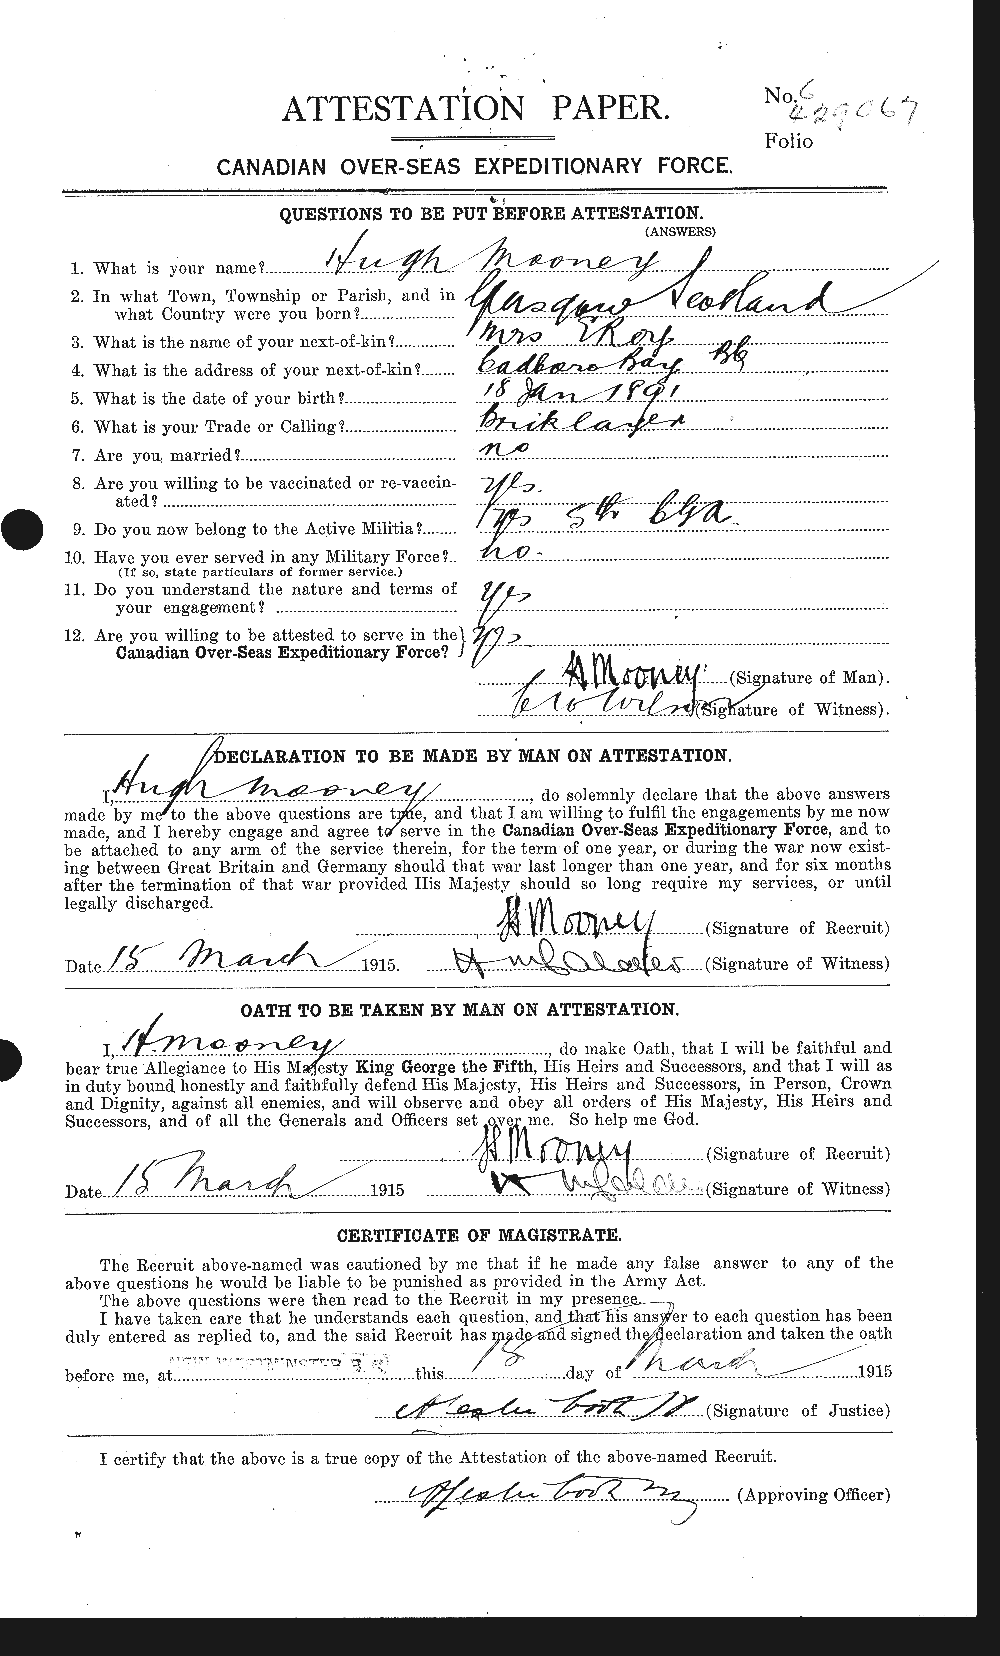 Personnel Records of the First World War - CEF 503108a